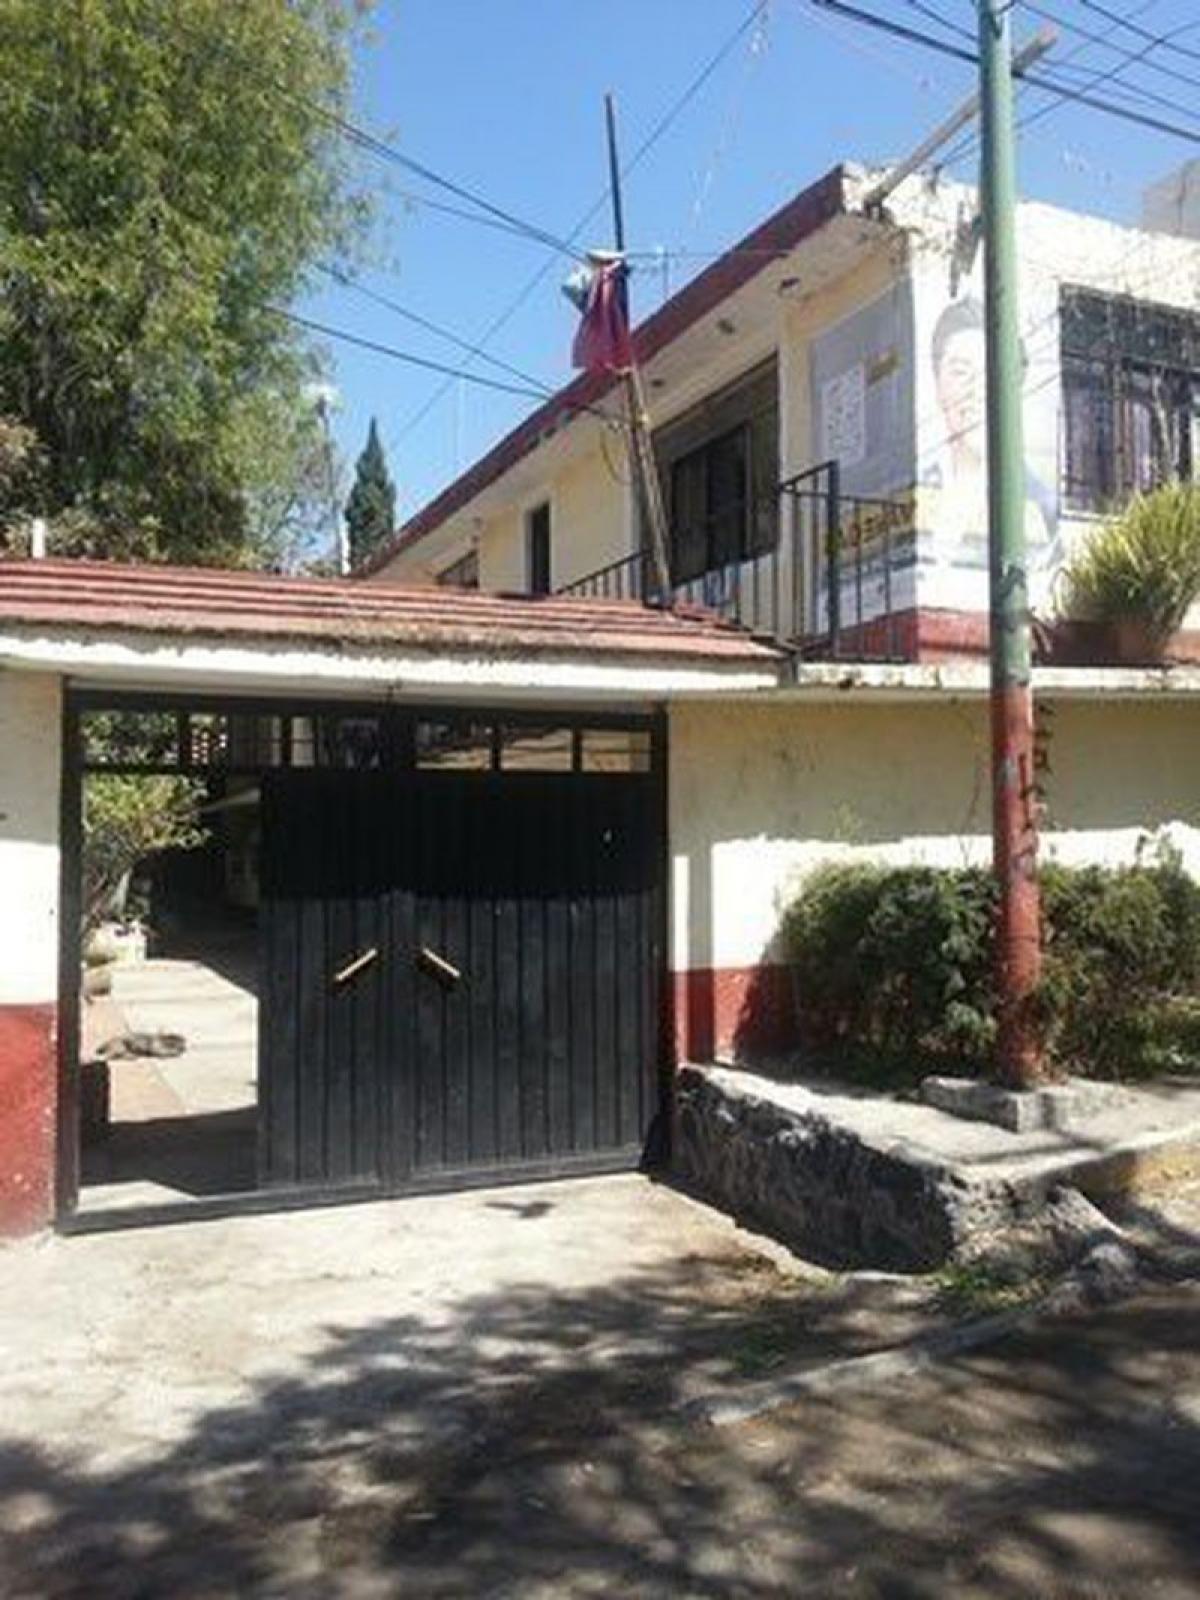 Picture of Home For Sale in Tlalpan, Mexico City, Mexico